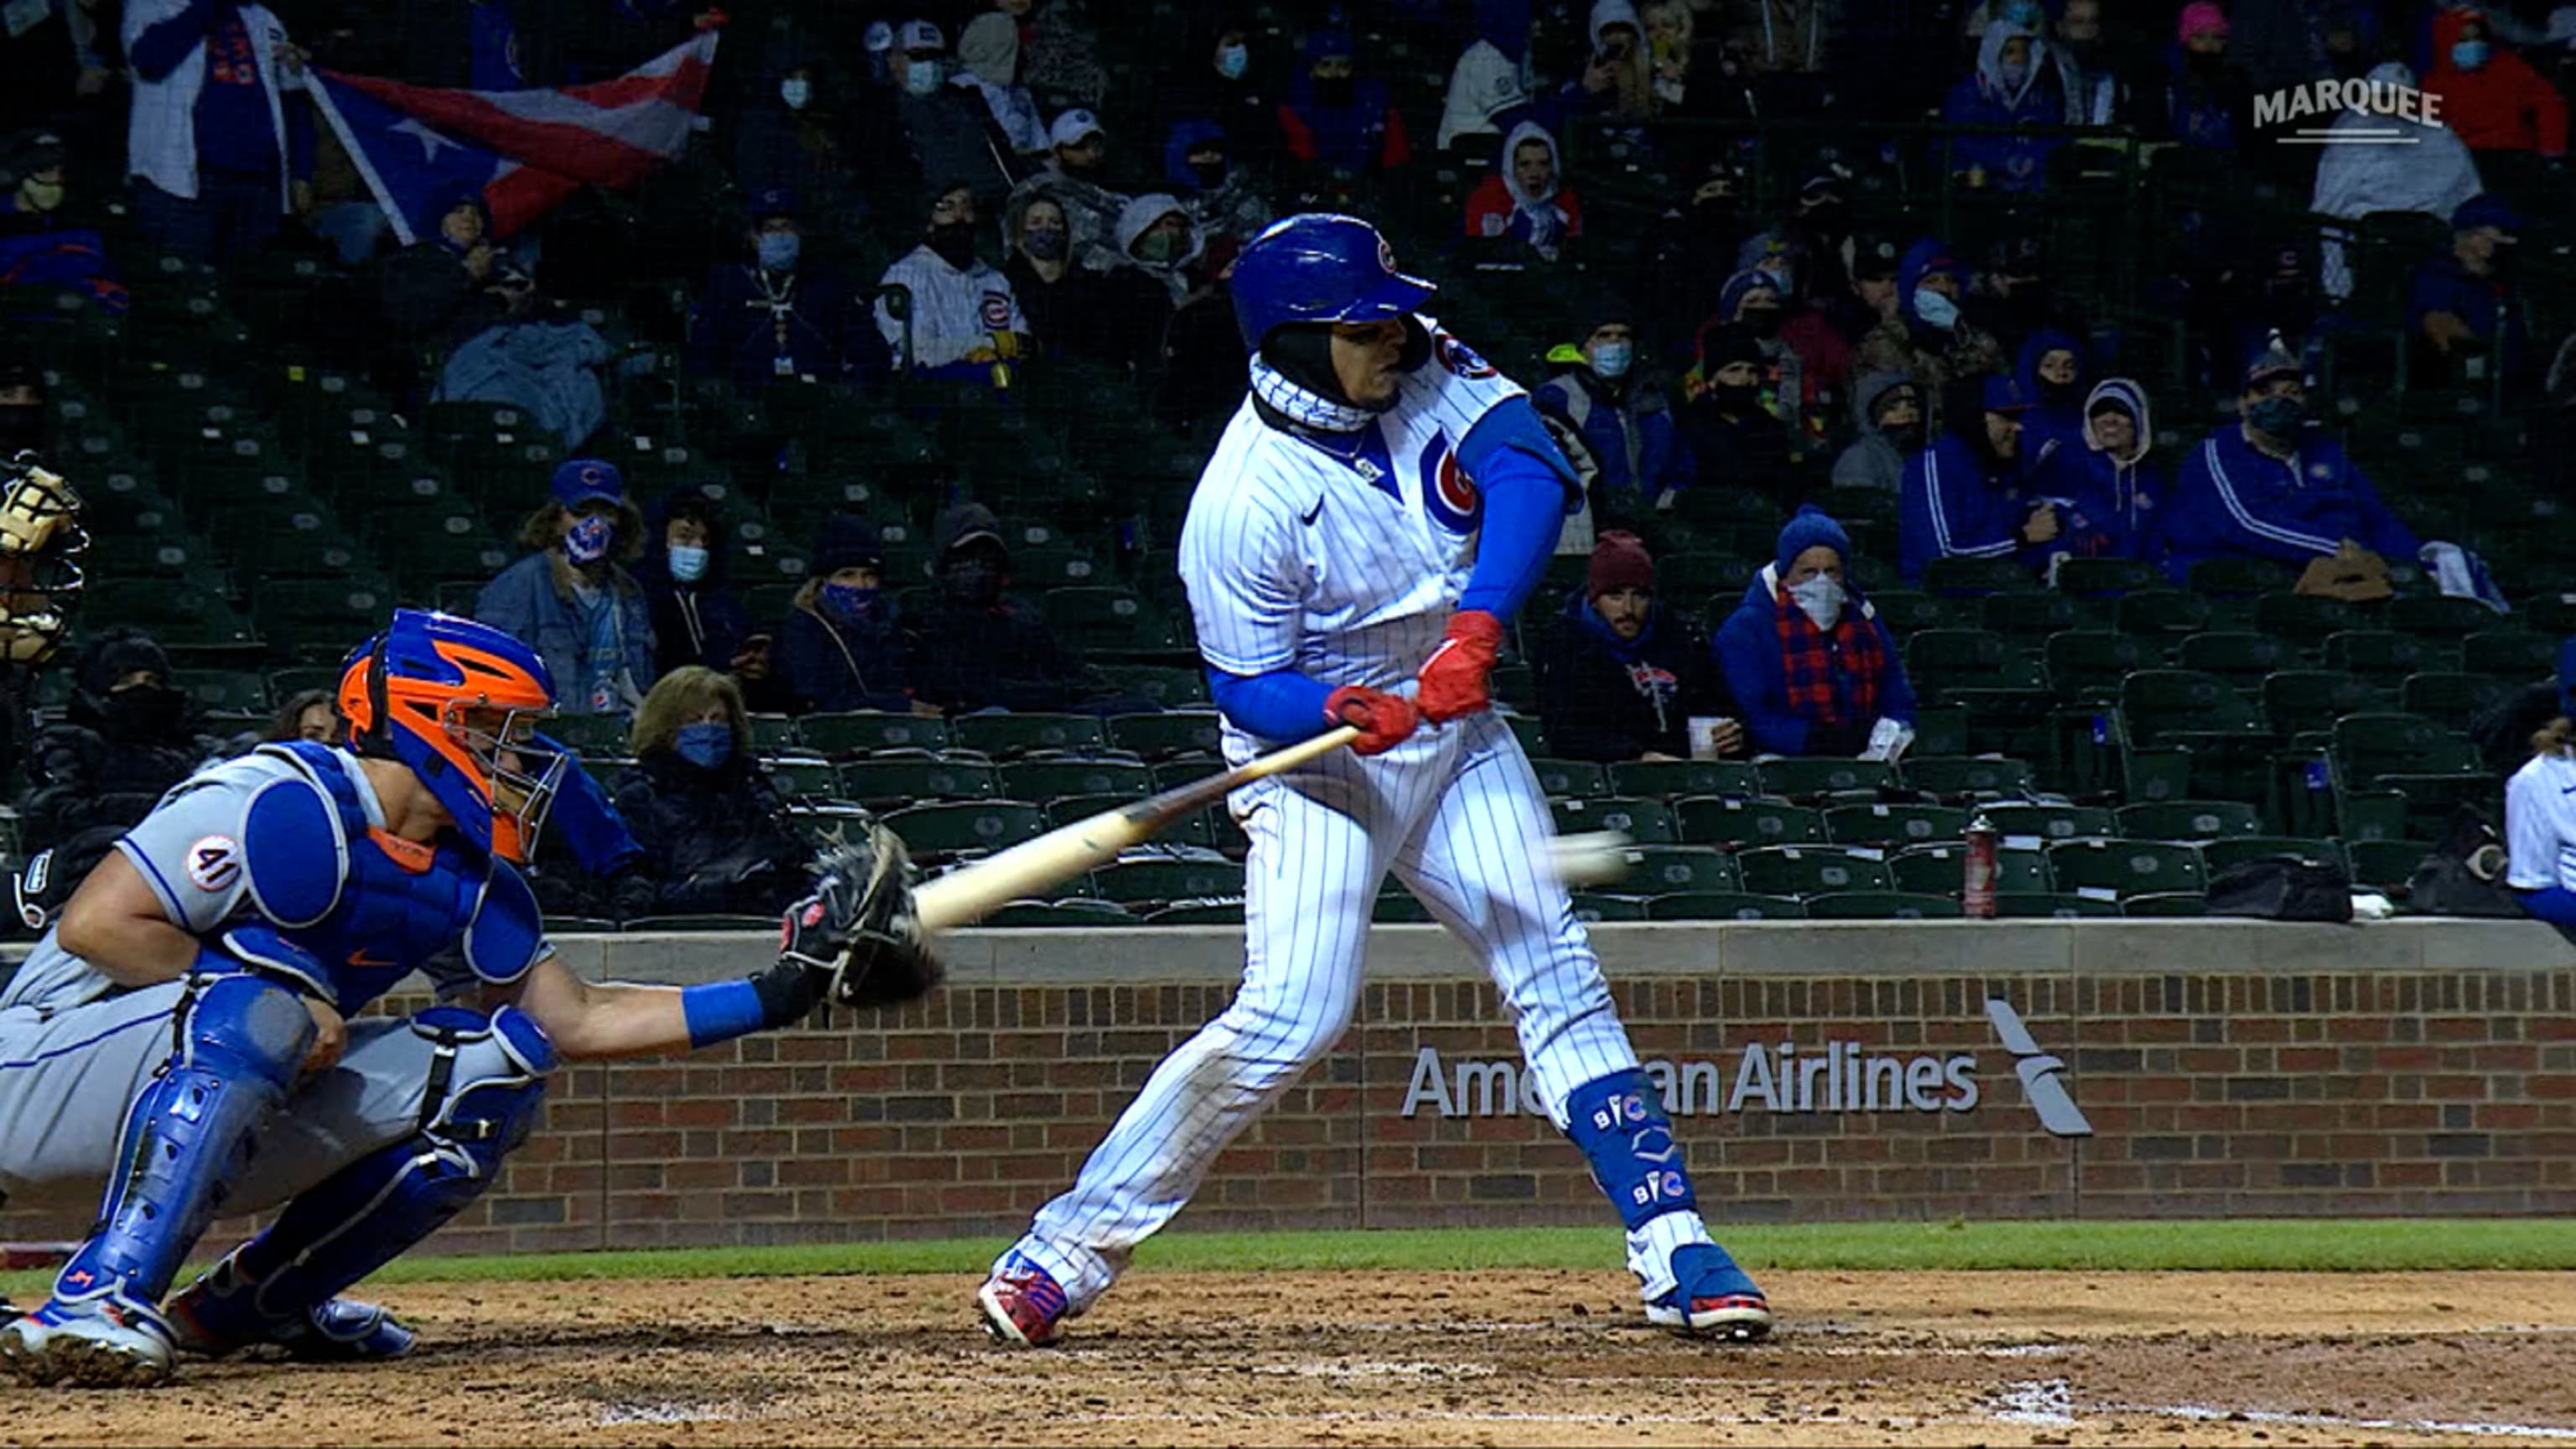 Baez hits 2 HRs as Cubs open season with 12-4 win at Rangers